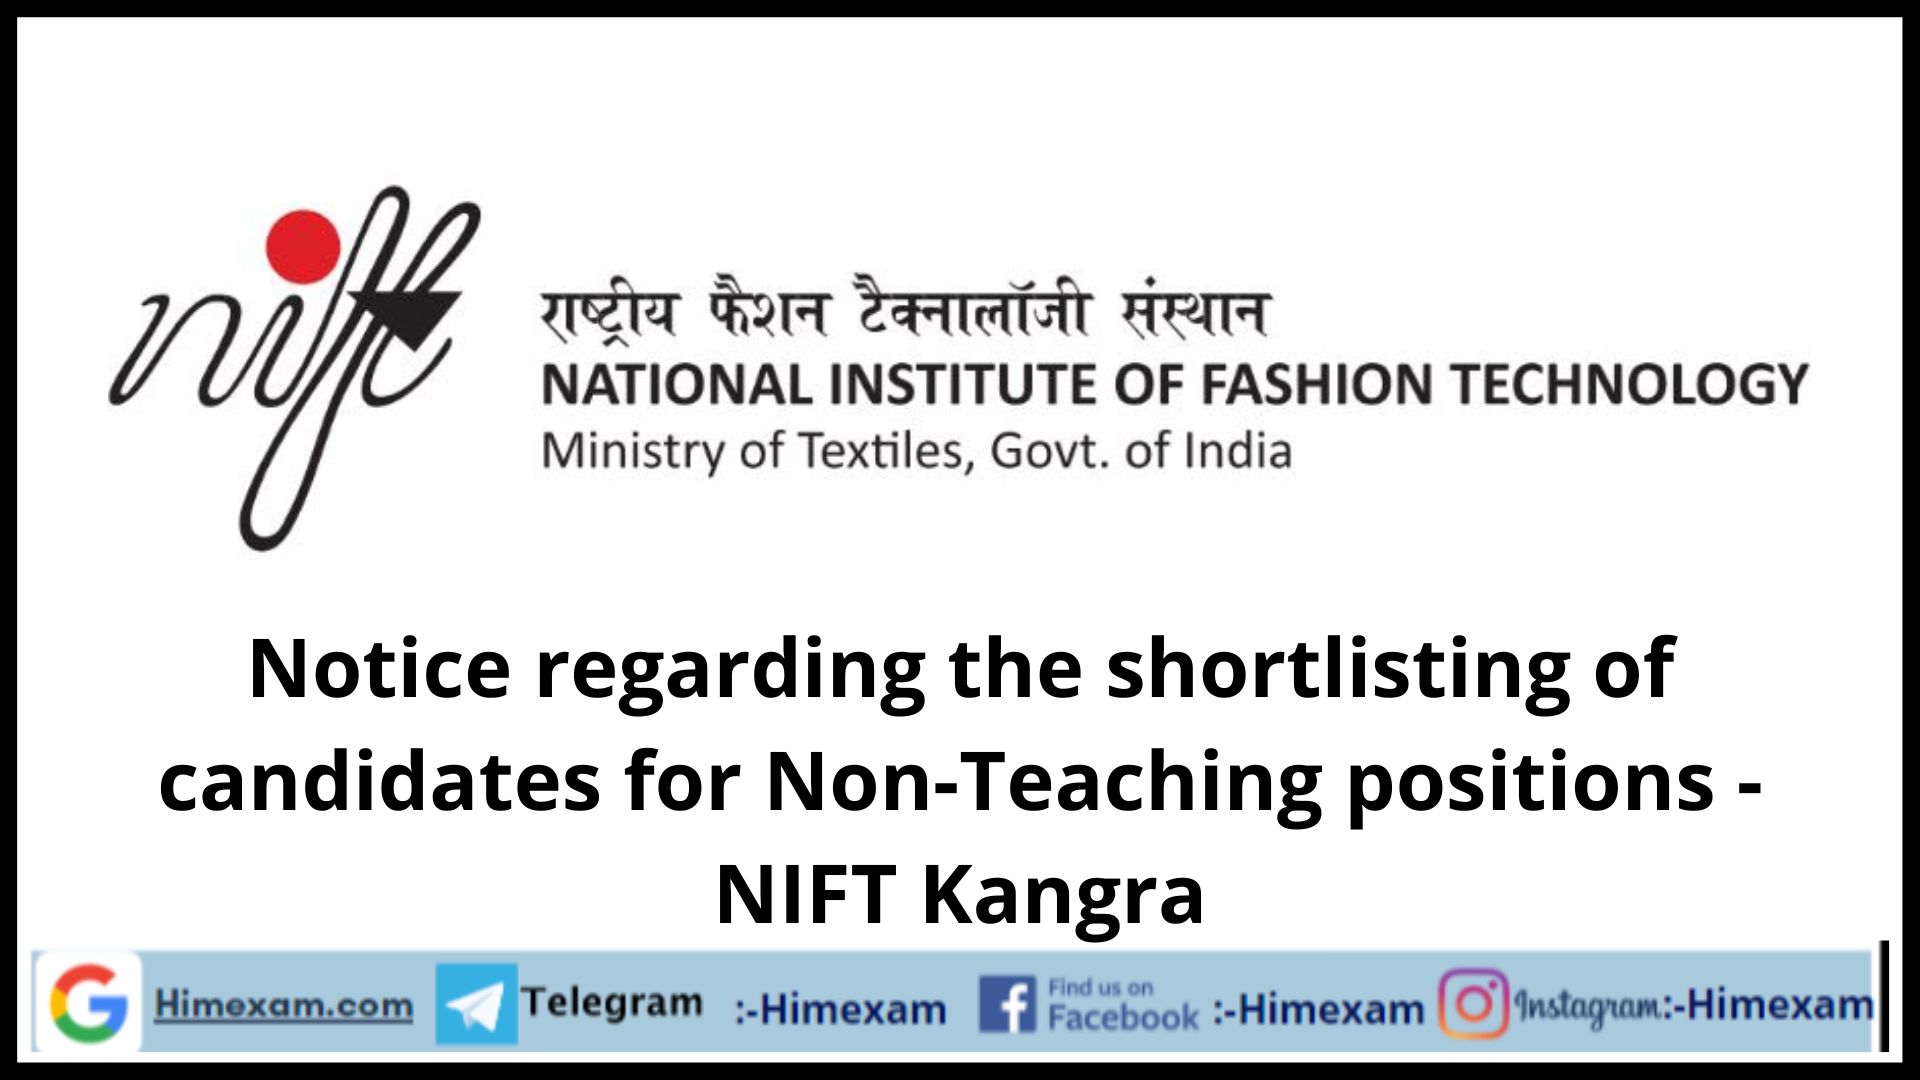 Notice regarding the shortlisting of candidates for Non-Teaching positions - NIFT Kangra